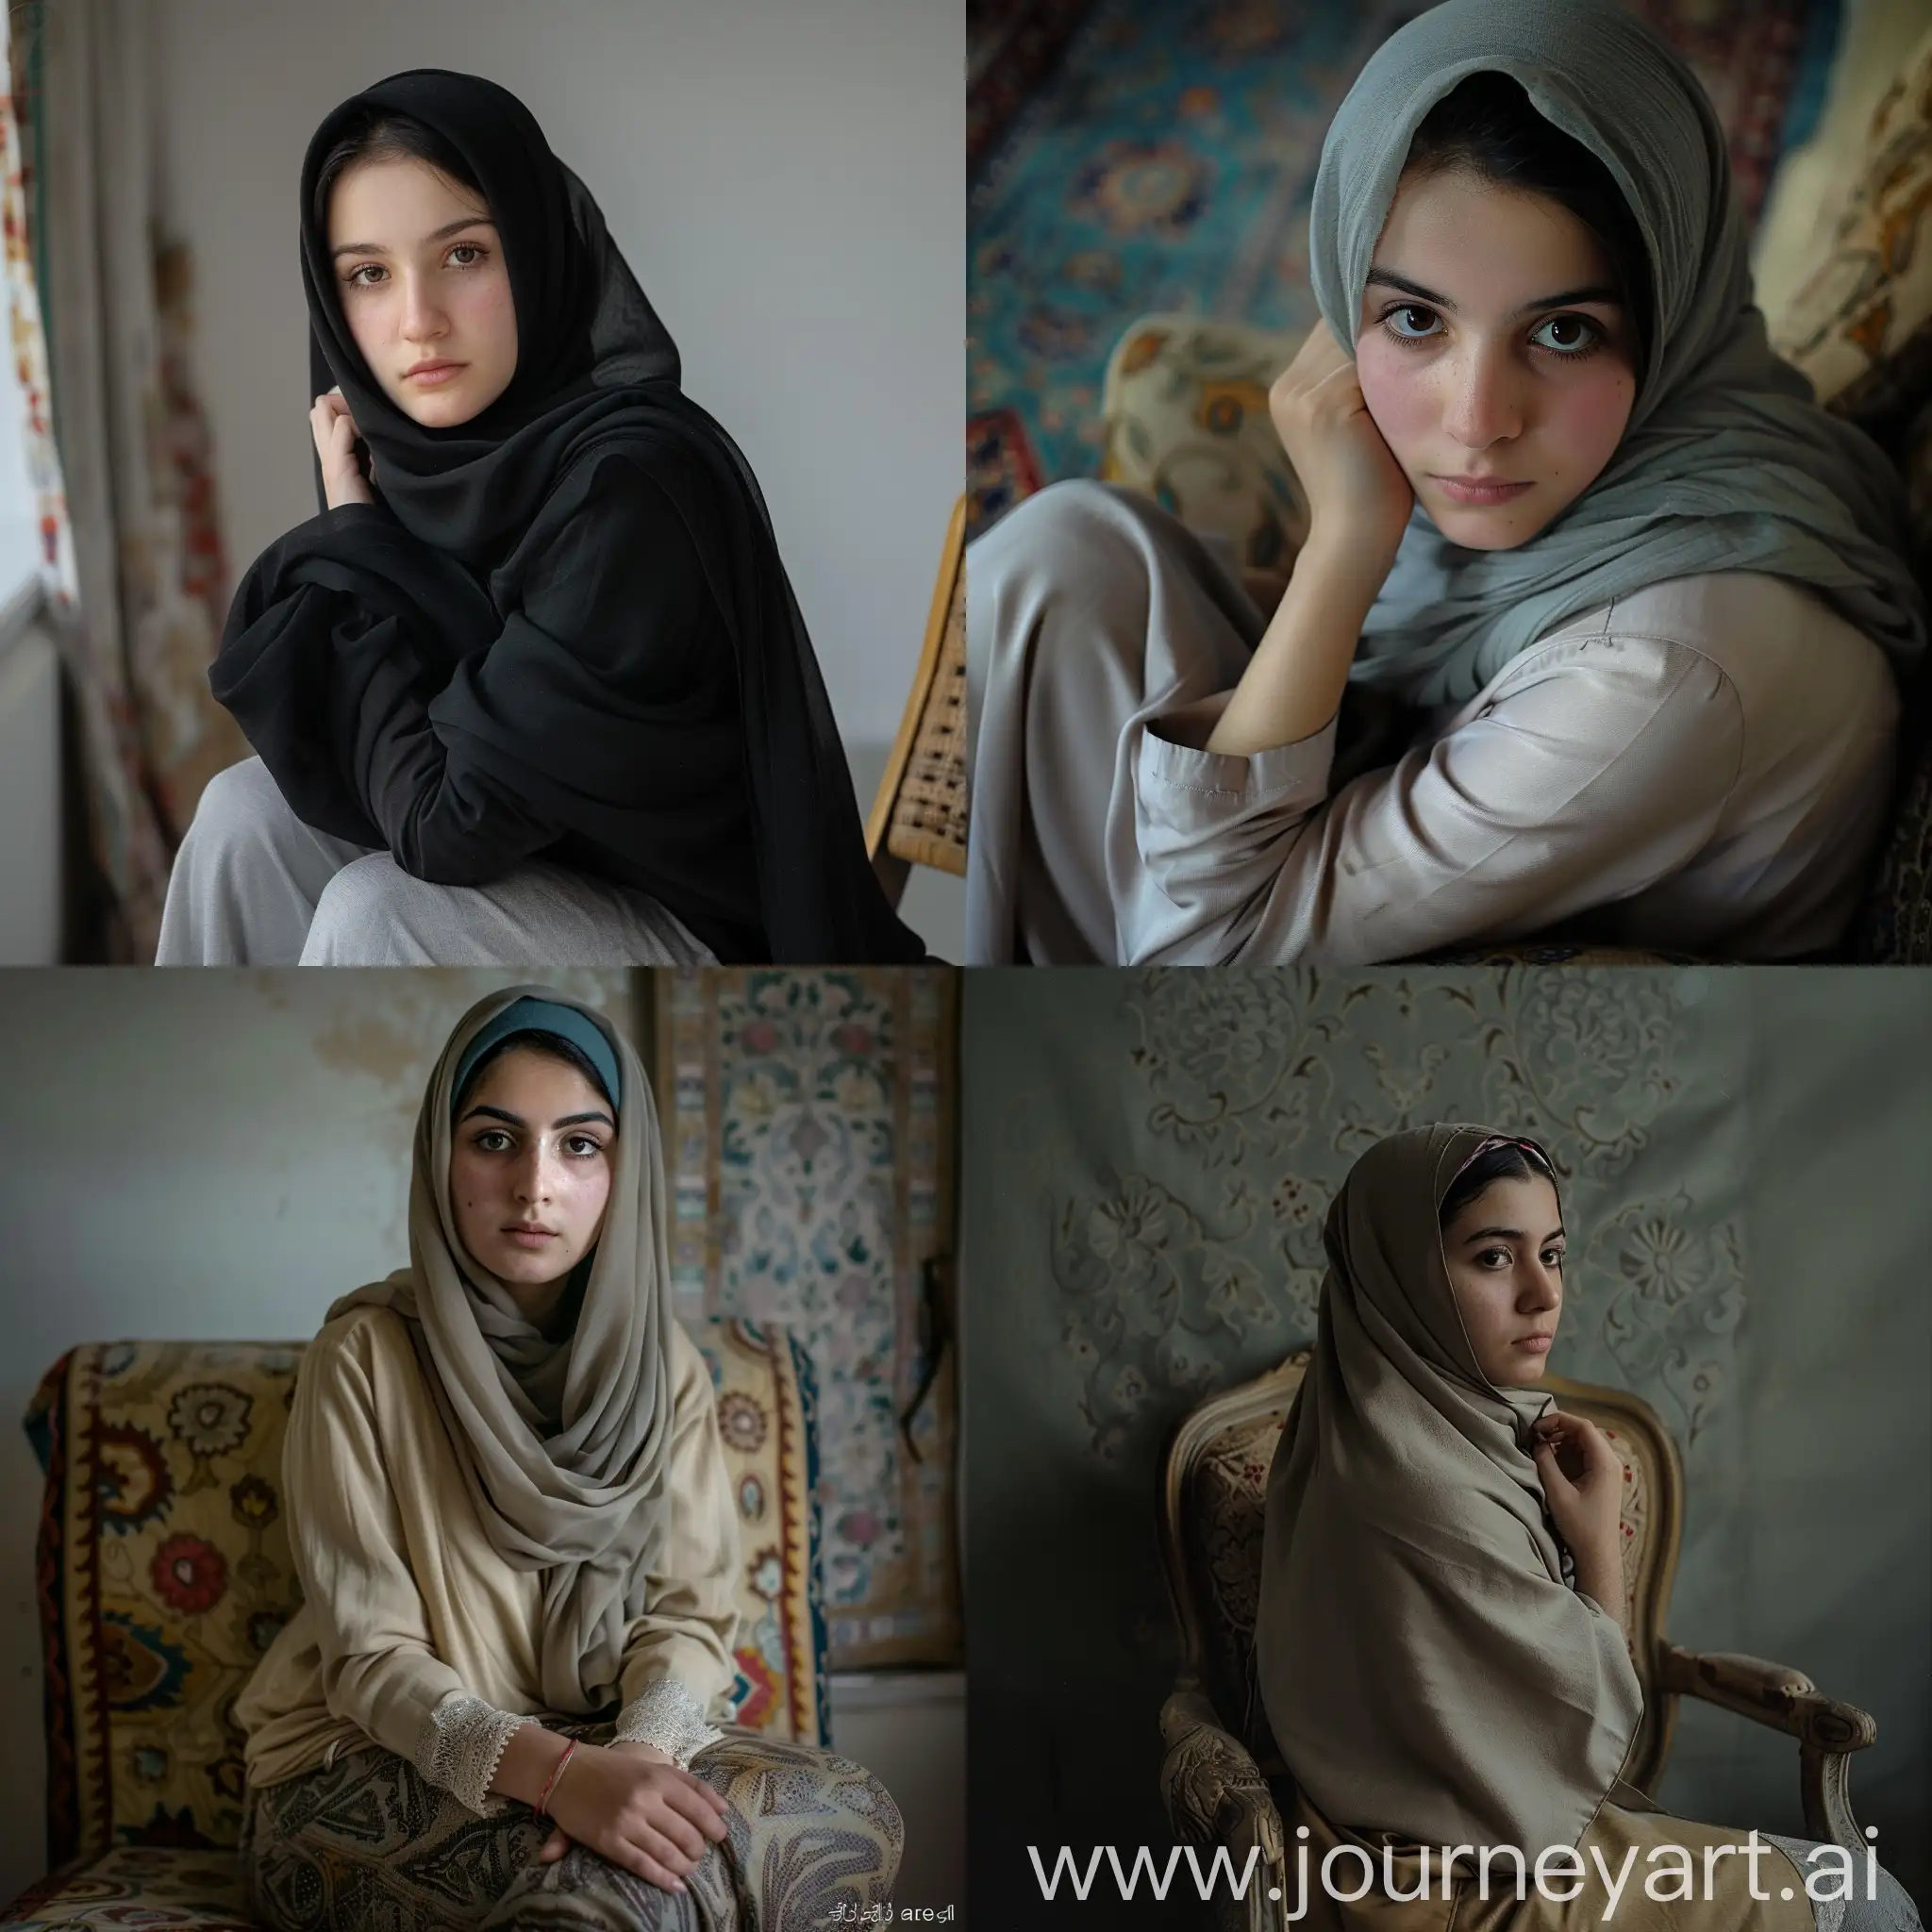 An Iranian girl in hijab, about 25 years old, waiting on a chair